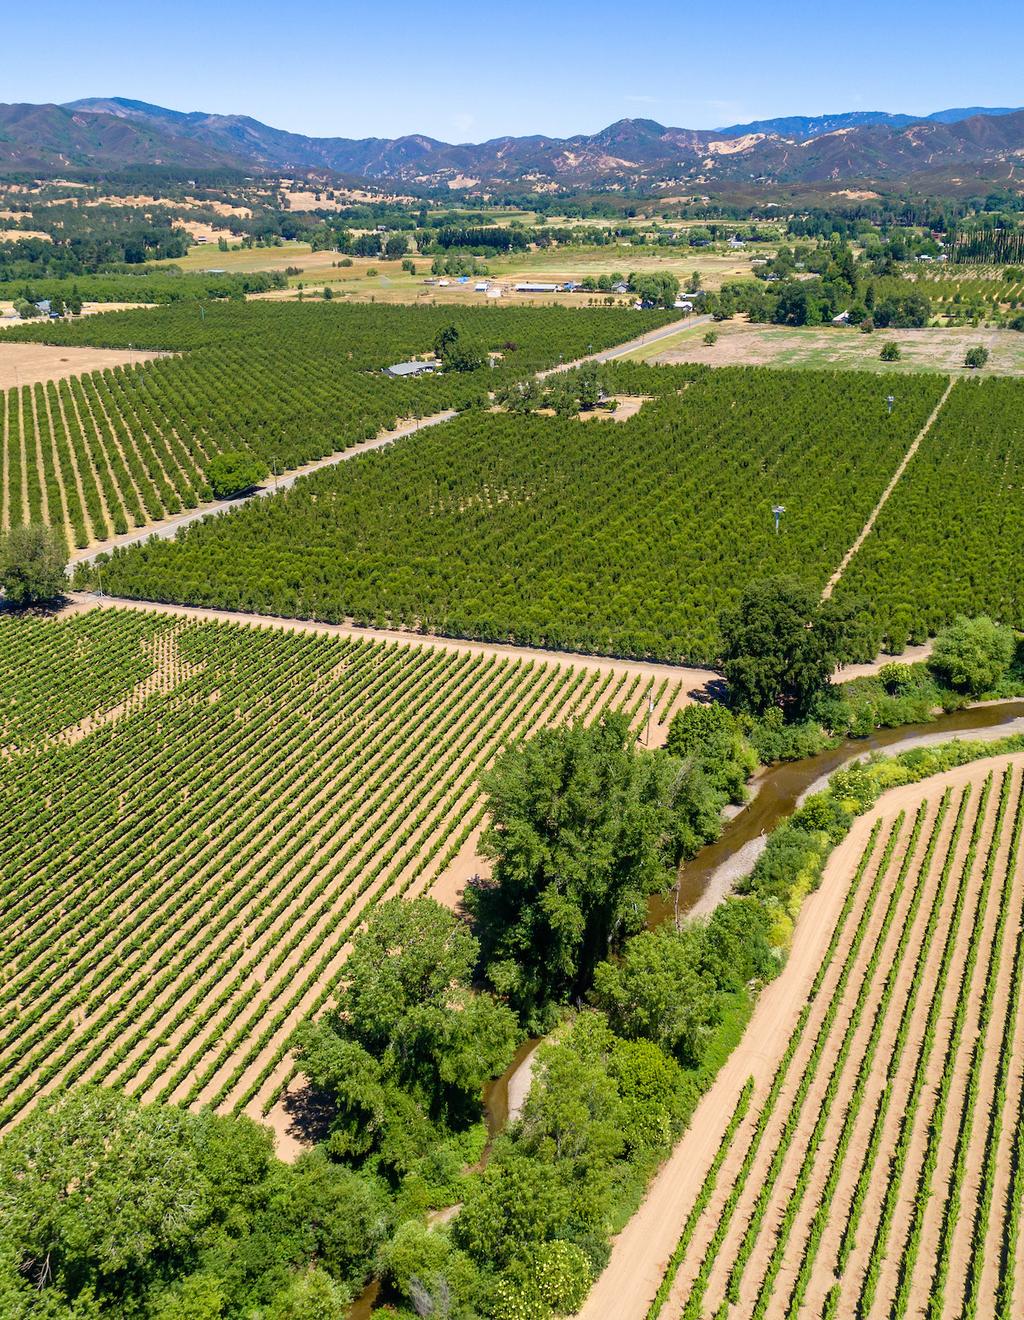 Located in the beautiful Scotts Valley region of Lake County and only minutes from downtown Lakeport, this 275+/- acre pear and grape farm is one of the agricultural jewels of North California s pear